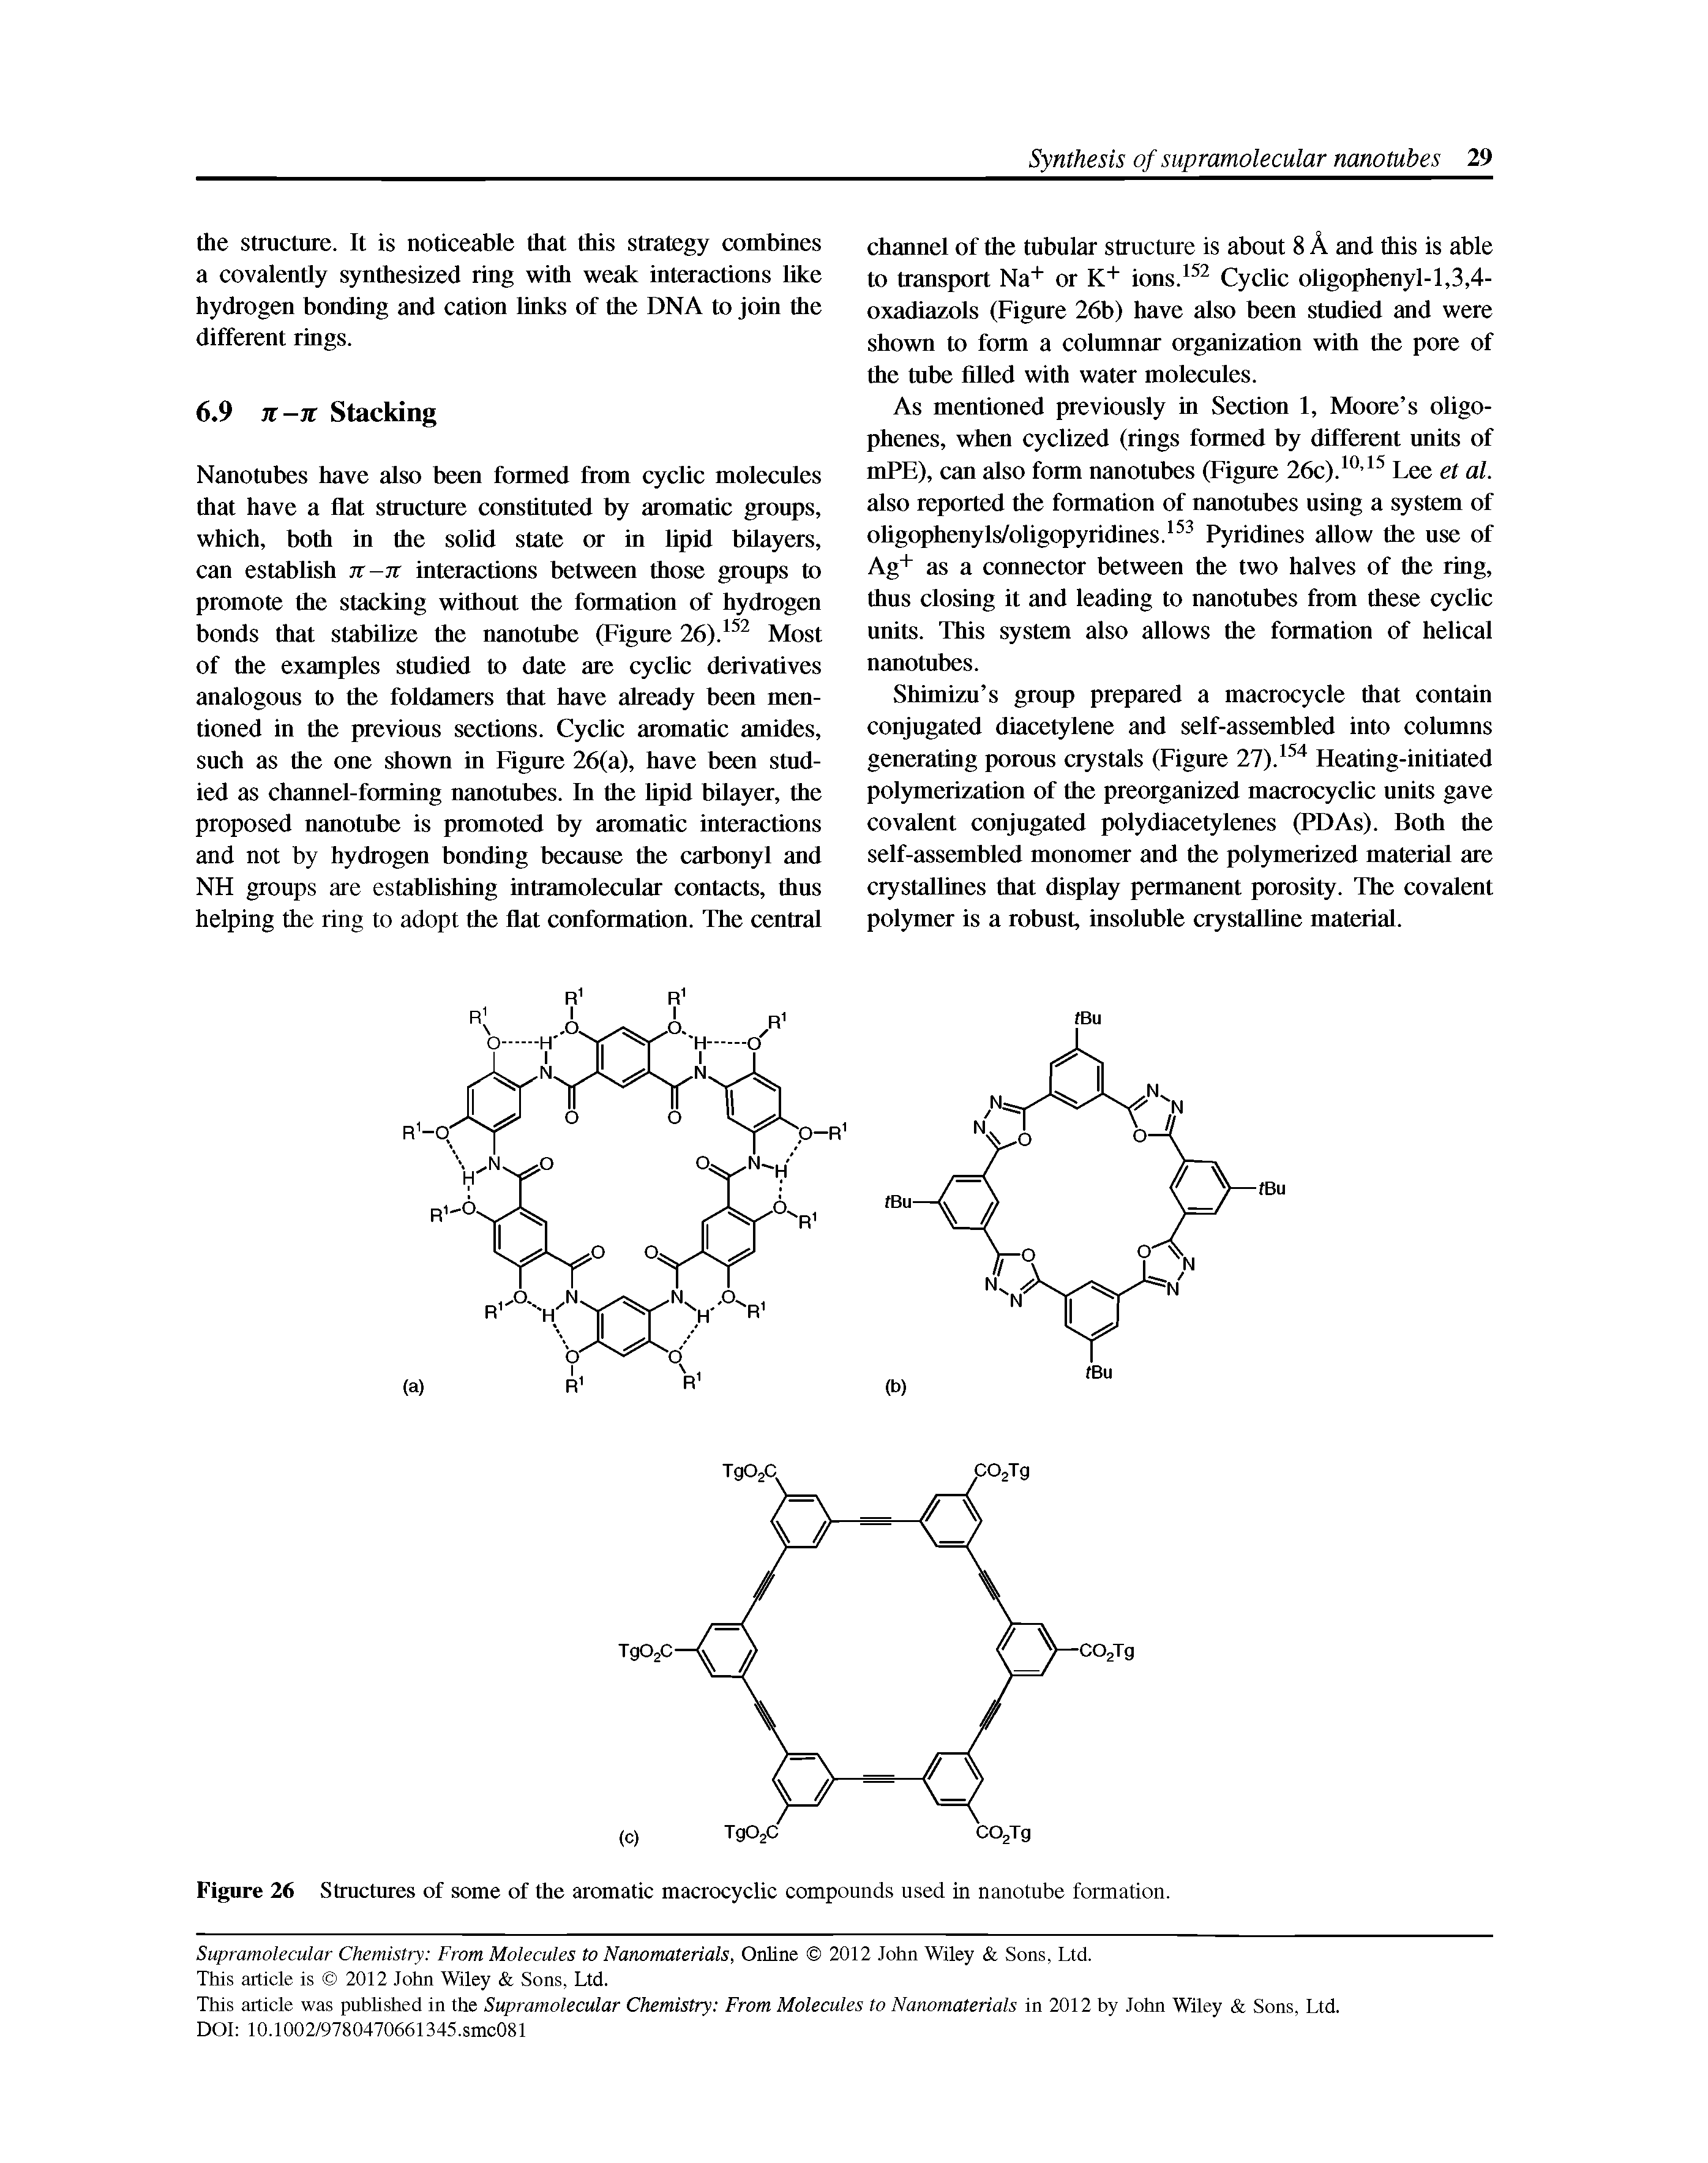 Figure 26 Structures of some of the aromatic macrocyclic compounds used in nanotube formation.